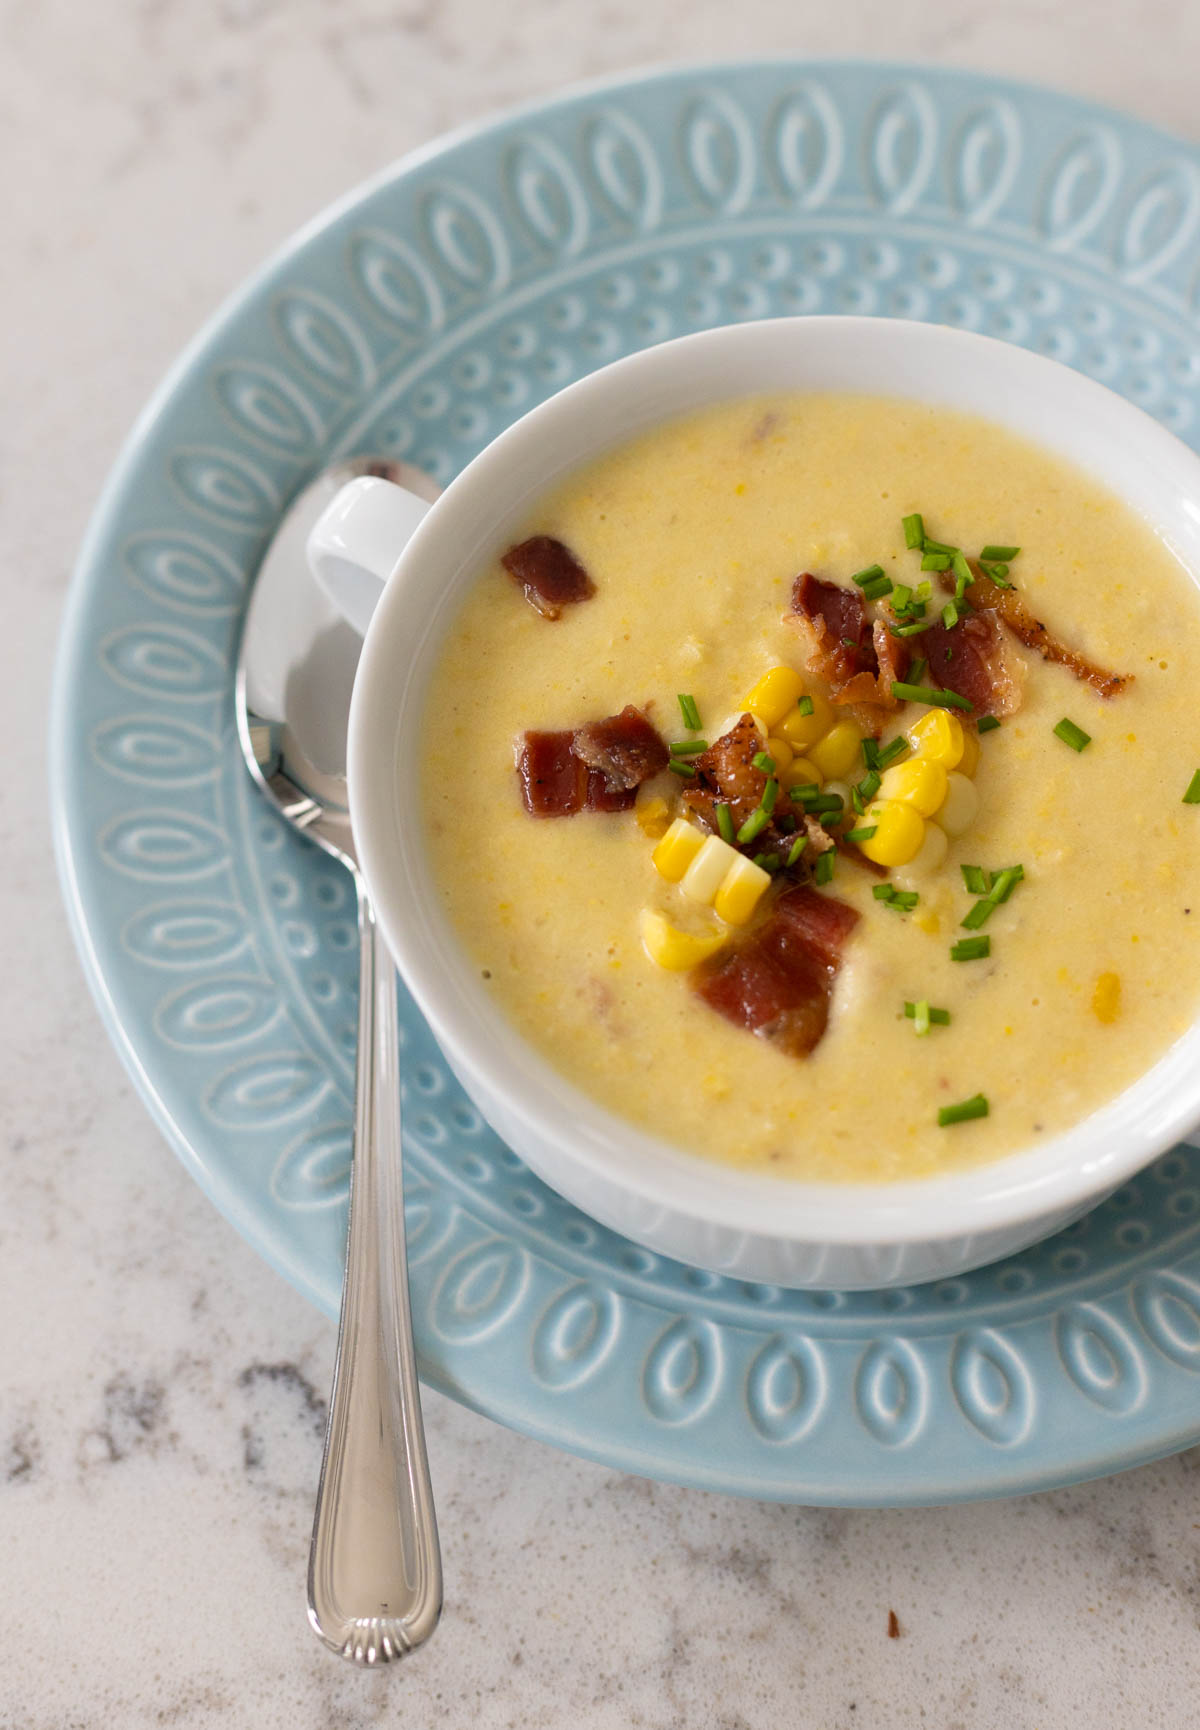 The bird's eye view of the corn chowder shows the chopped bacon and chunks of corn used as garnish.